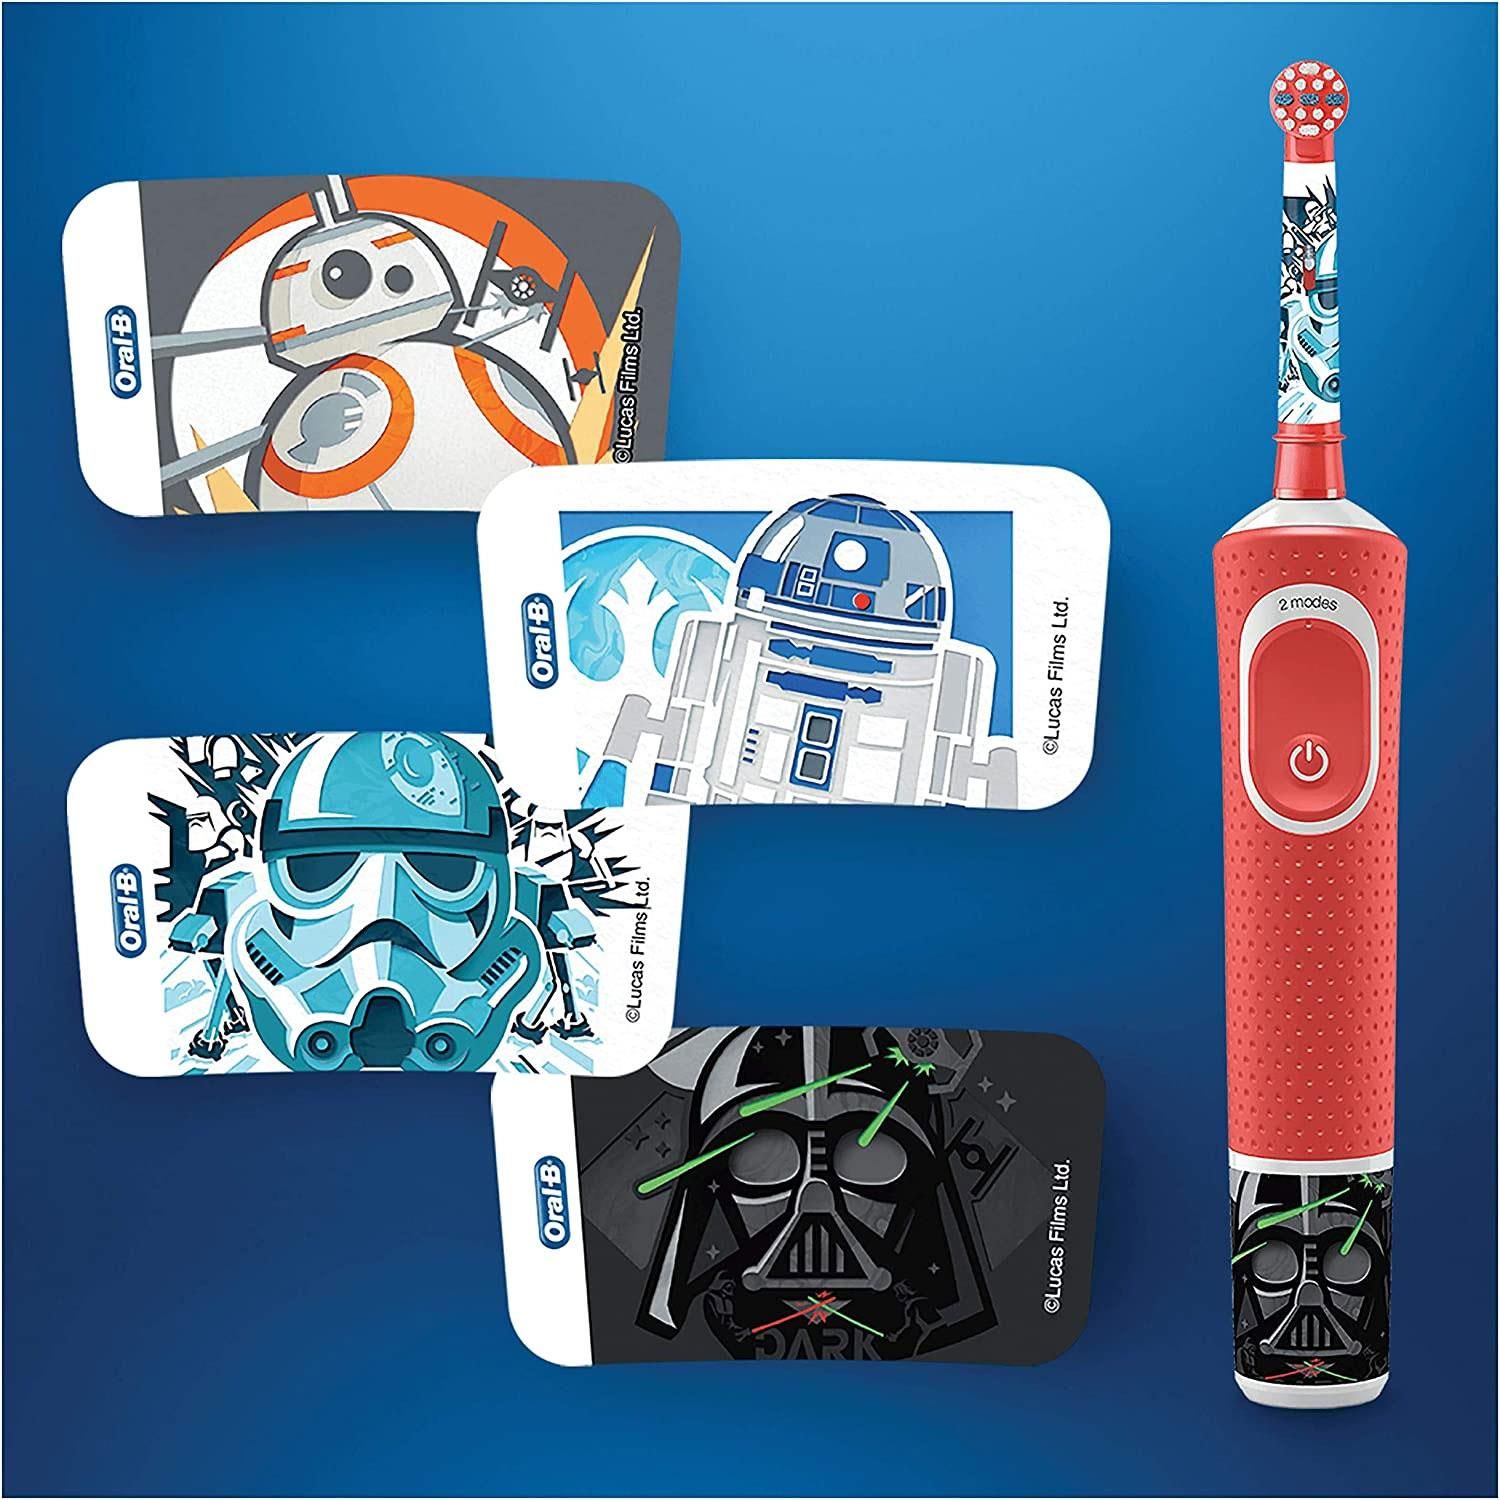 Oral-B KIDS 3+ Star Wars Electric Toothbrush for Kids with Travel Case.  The Oral-B Kids electric toothbrush for ages 3+ gives kids the fun of Star Wars with the gentle, effective clean of a dentist-recommended Oral-B toothbrush. With a unique, kid-friendly sensitive mode, this brush gently cleans kids' teeth. It removes more plaque than a regular manual toothbrush. Four Star Wars themed stickers are included to customize the handle. 

Features: 

  Specifically designed to be gentle for kids
  Round brush head sized for small mouths
  Extra-soft bristles are gentle on tender gums
  Suitable for ages 3+
  Customize the brush handle with 4 Star Wars themed stickers
  Works with the Disney Magic Timer App by Oral-B
  Rechargeable battery for an 8-day charge
  Encourages brushing for 2 minutes with a built-in-timer

The Box contains: 1x Electric toothbrush, 4x stickers for the body of the brush, 1x replacement stages powerhead, 1x travel case with motif, 1x charging.